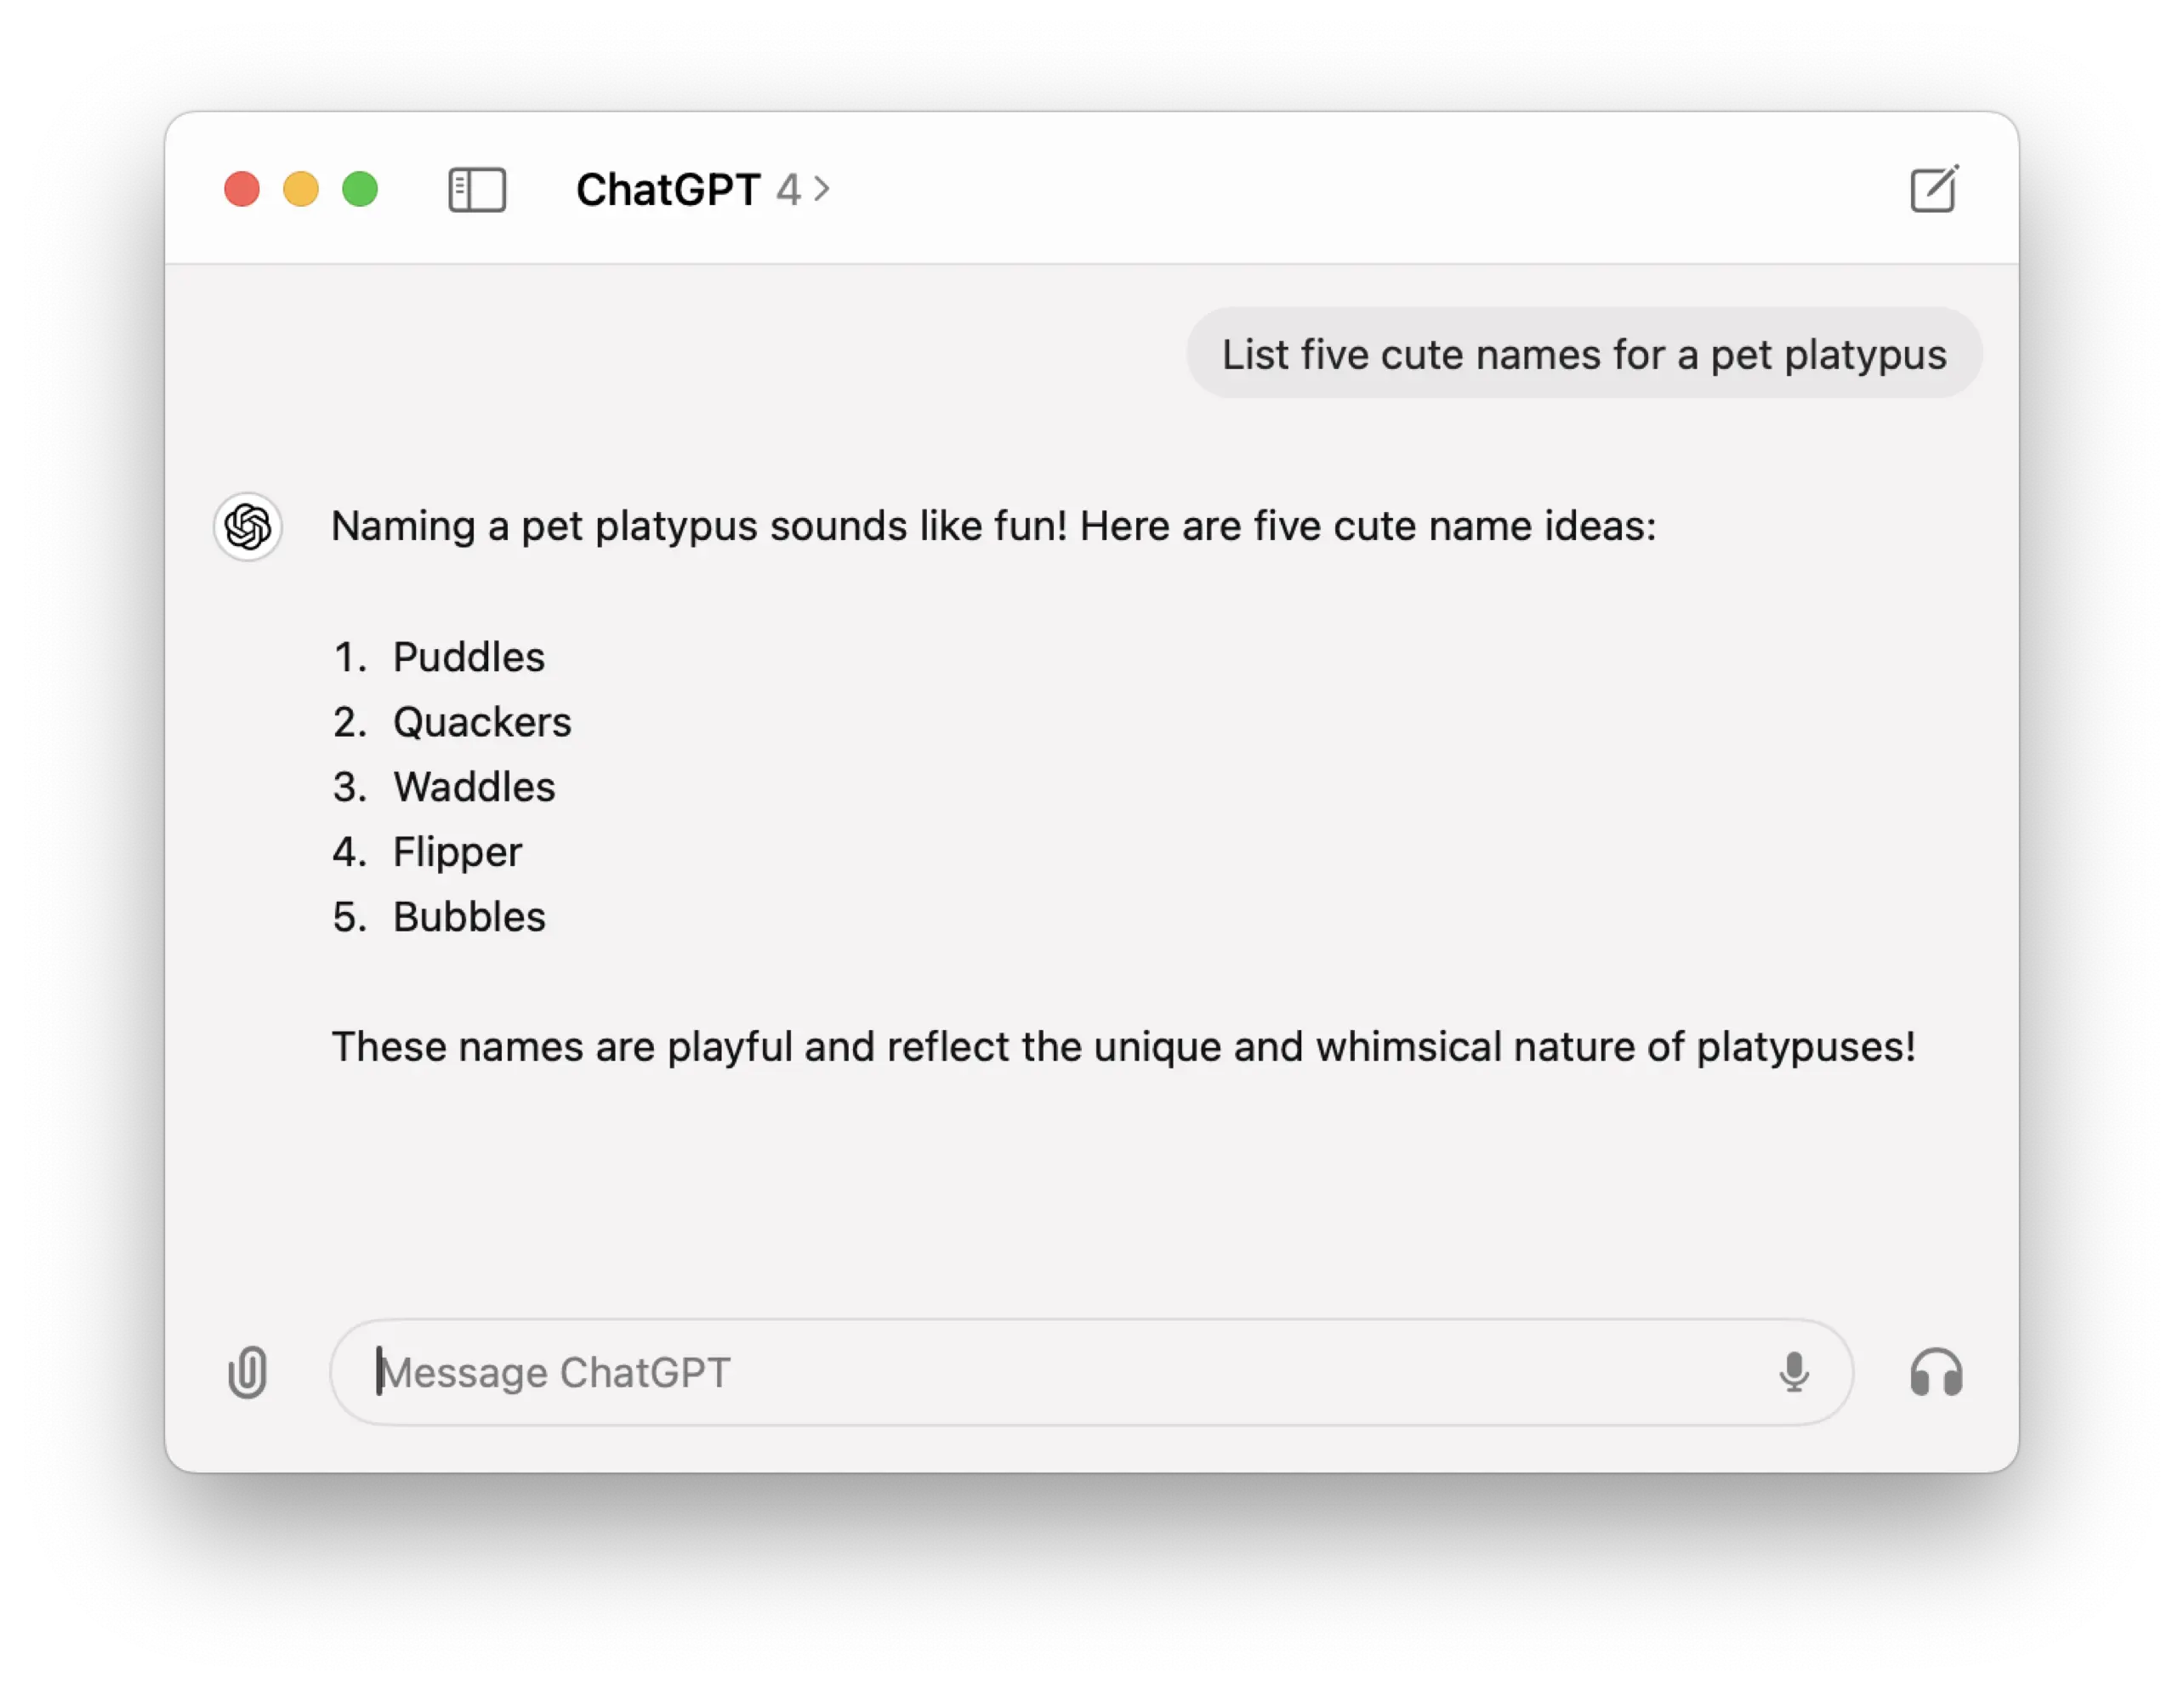 A screenshot of a ChatGPT conversation window with the prompt “List five cute names for a pet platypus” and the response listing the names: Puddles, Quackers, Waddles, Flipper, and Bubbles. ChatGPT: the standard interface for ‘AI’